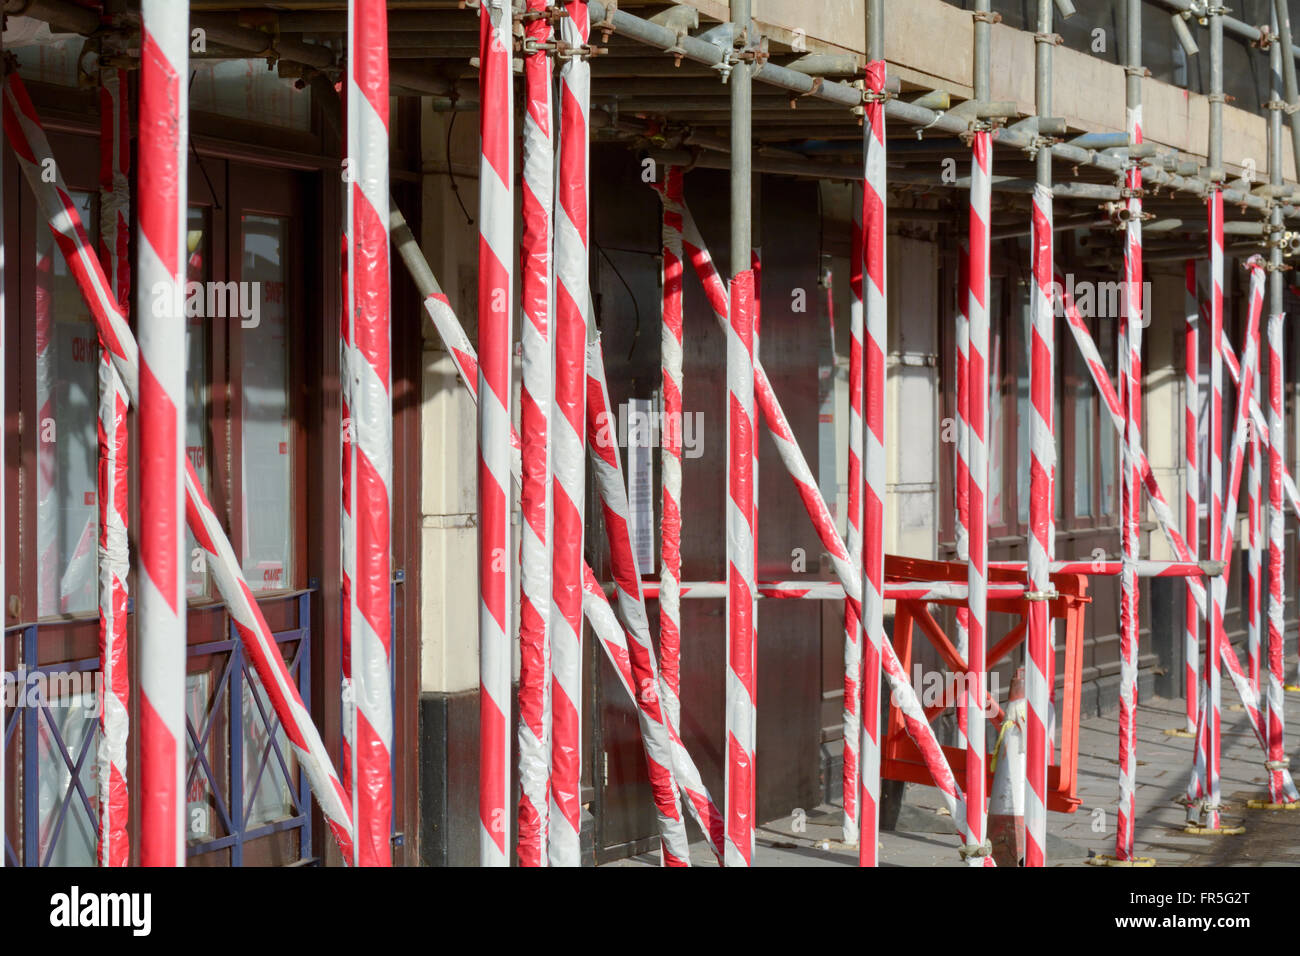 Scaffolding poles outside building covered with red and white plastic cladding to warn pedestrians of danger above Stock Photo